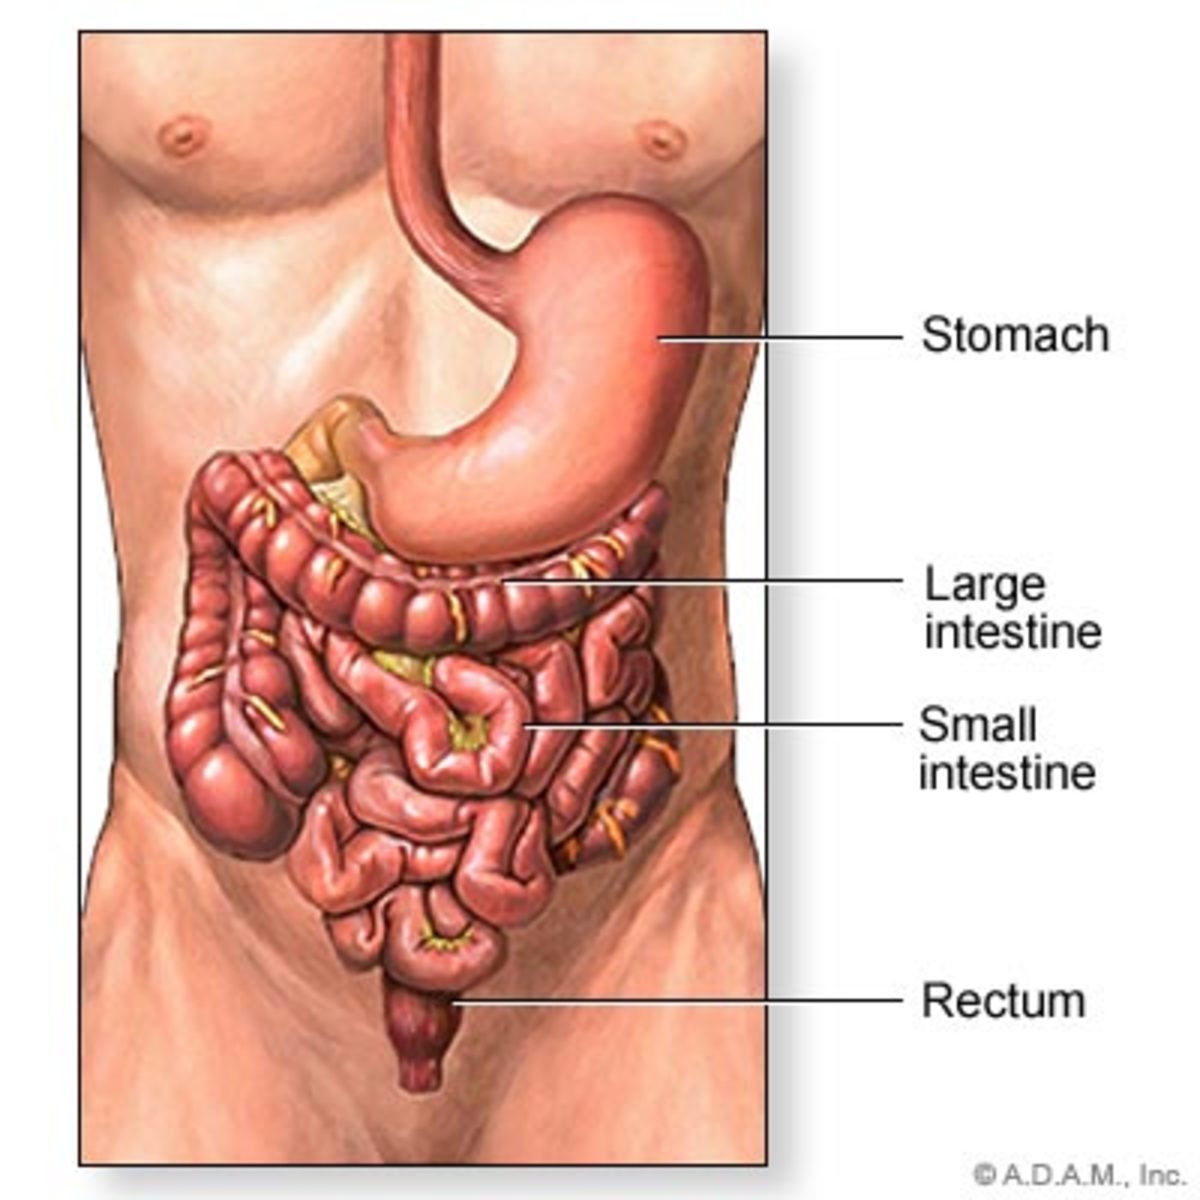 Adult female pinworms reside in the large intestine.